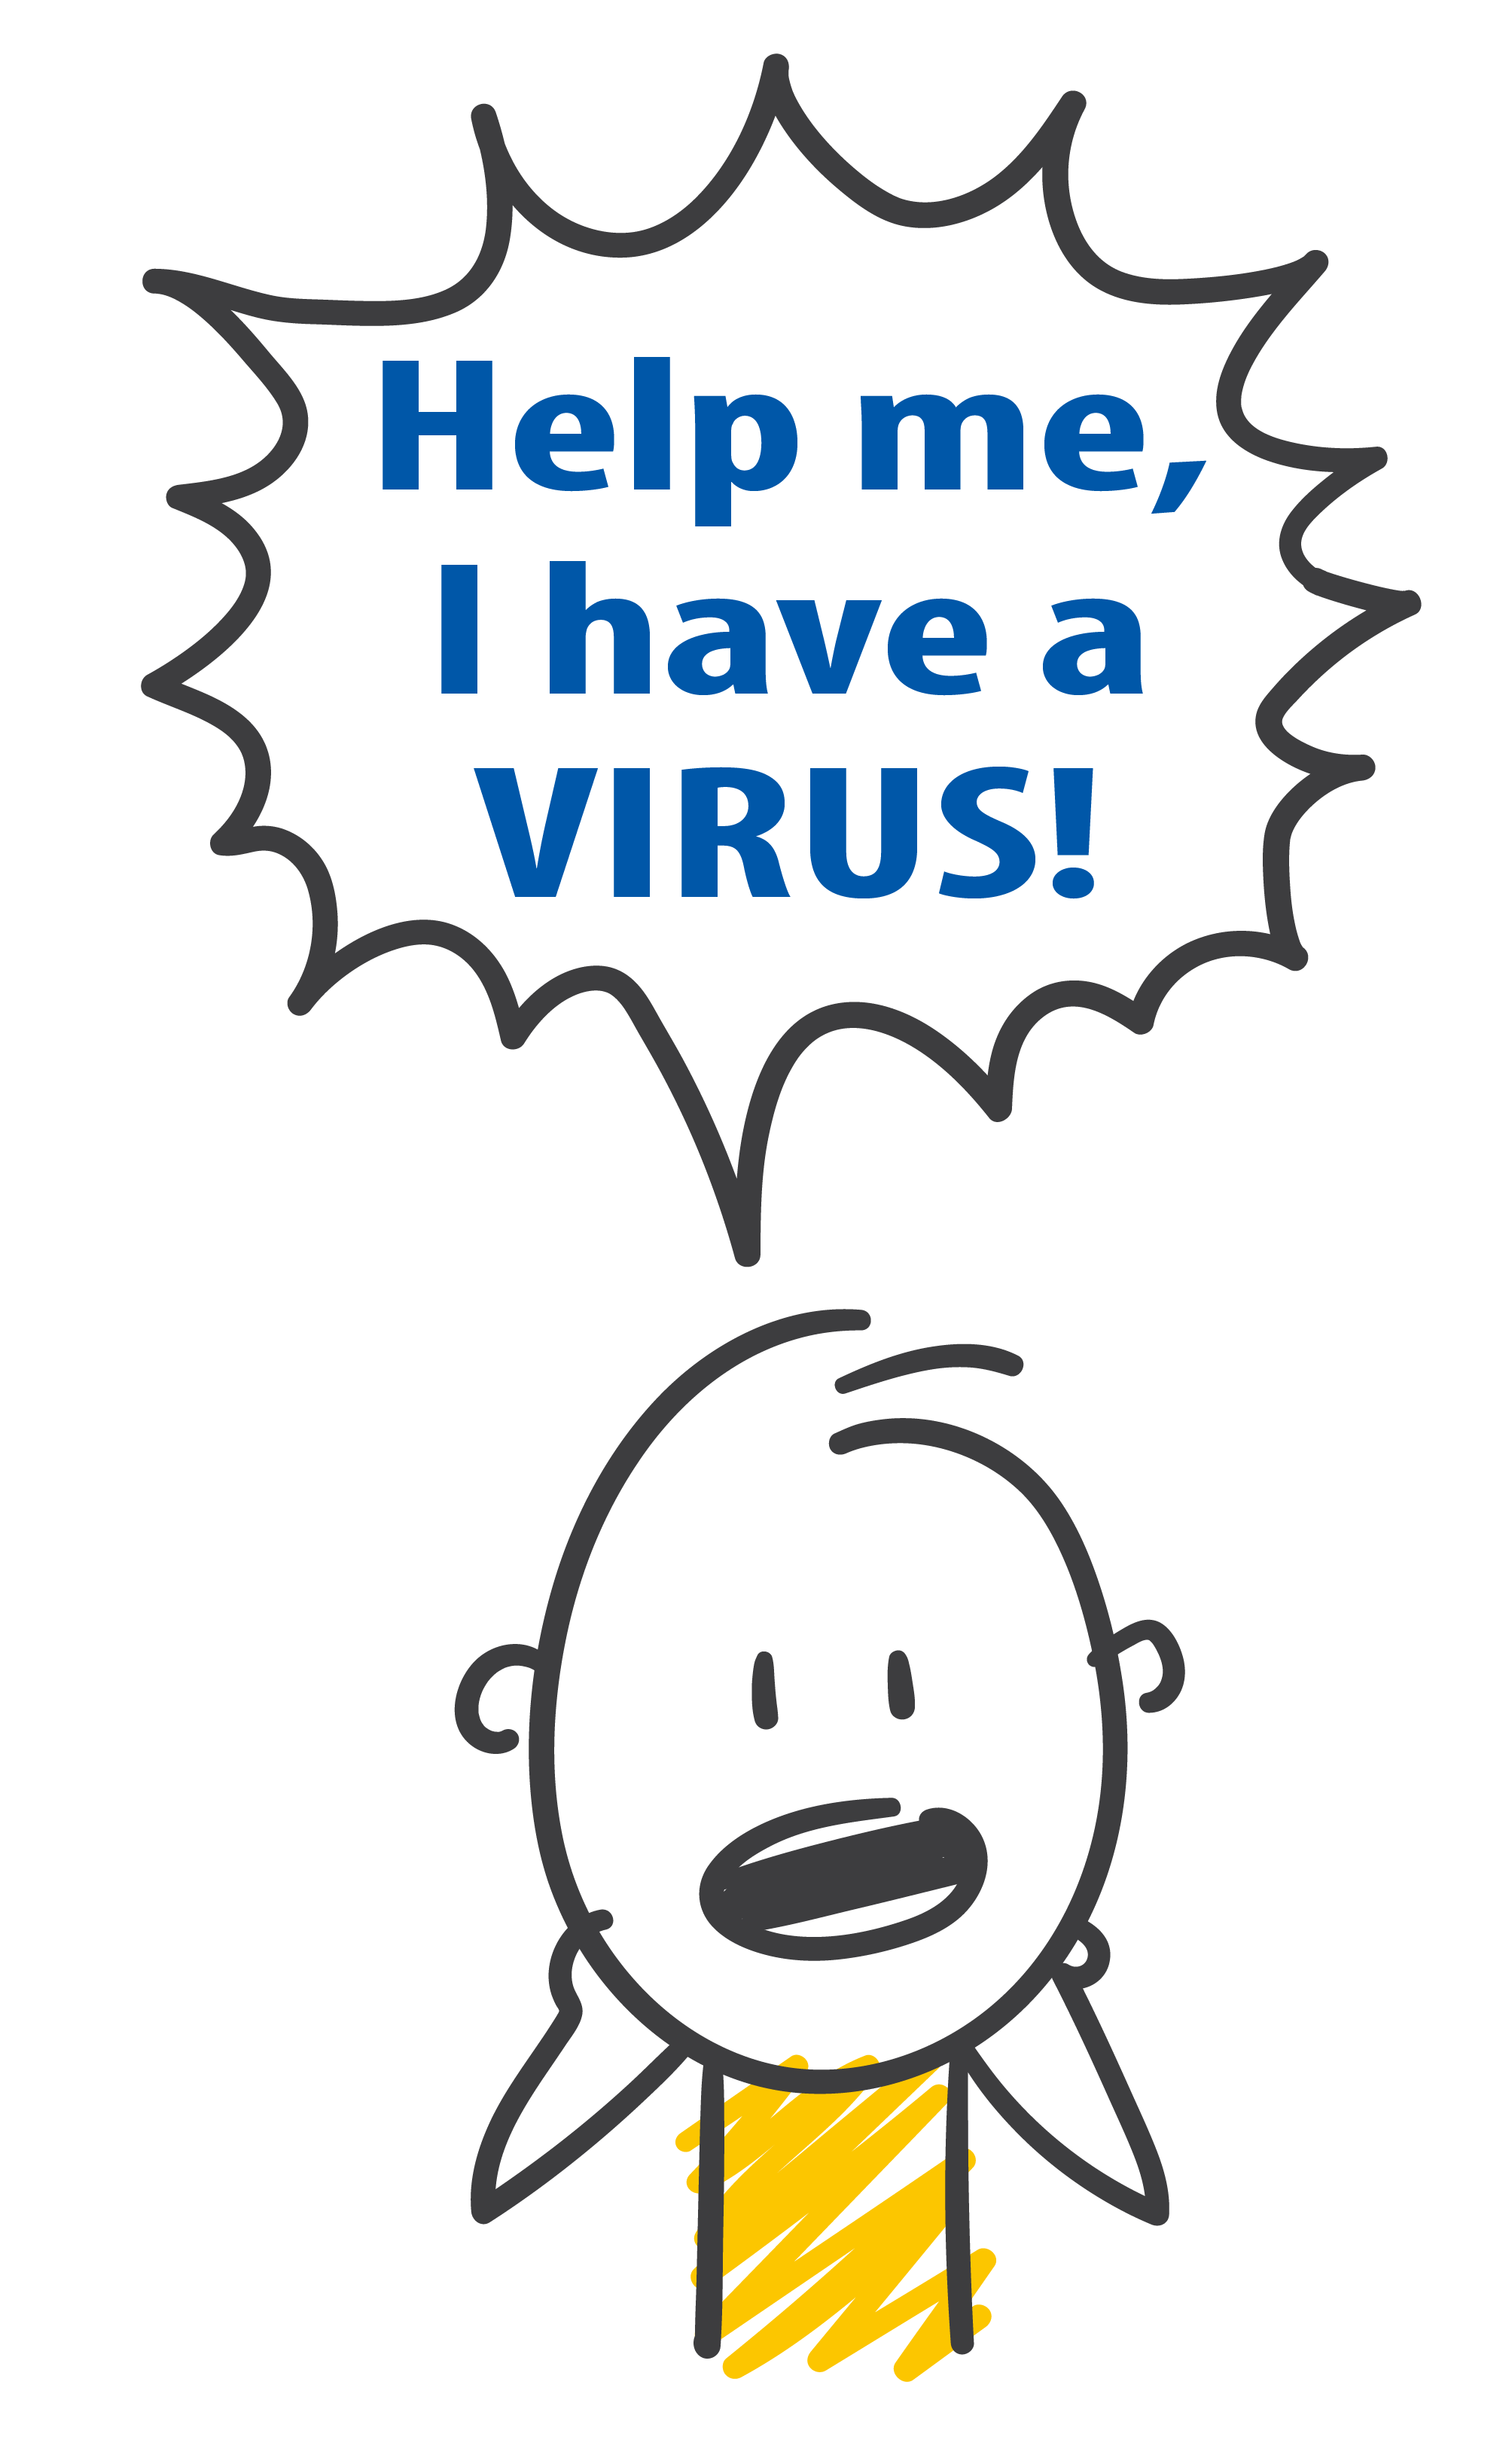 Help me, I have a virus!